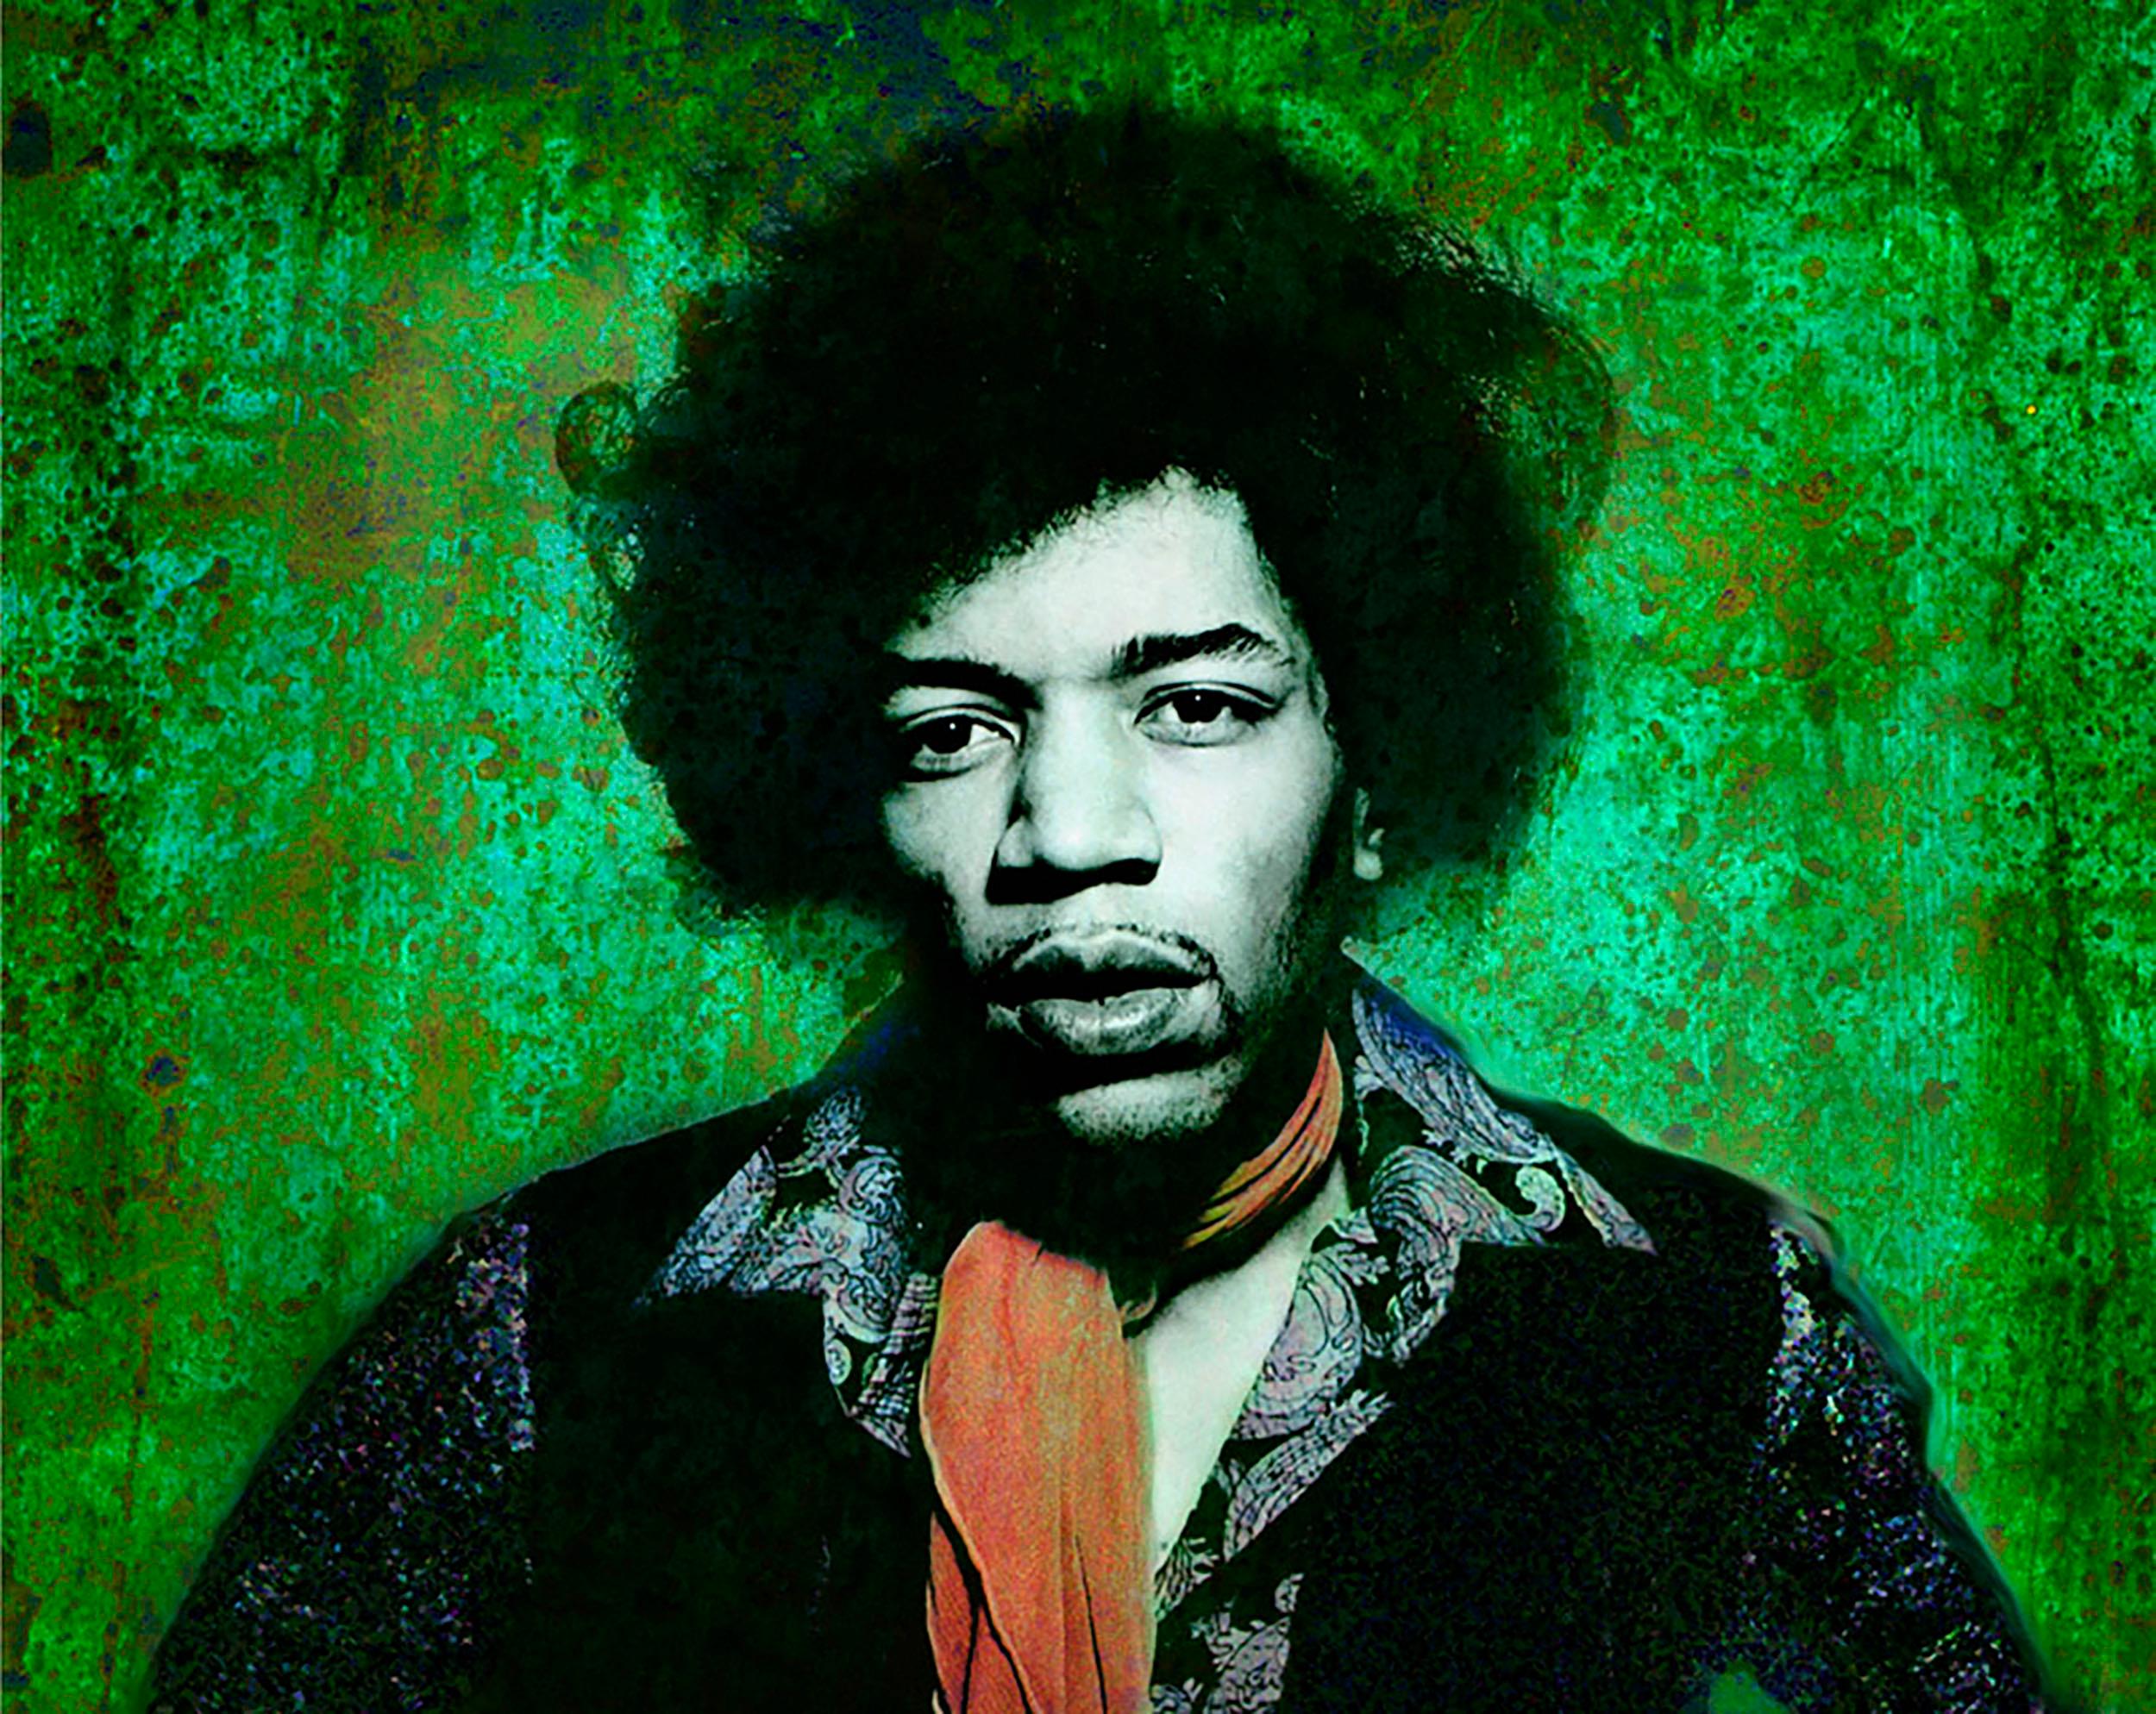 Gered Mankowitz Color Photograph - Jimi Hendrix Colorized